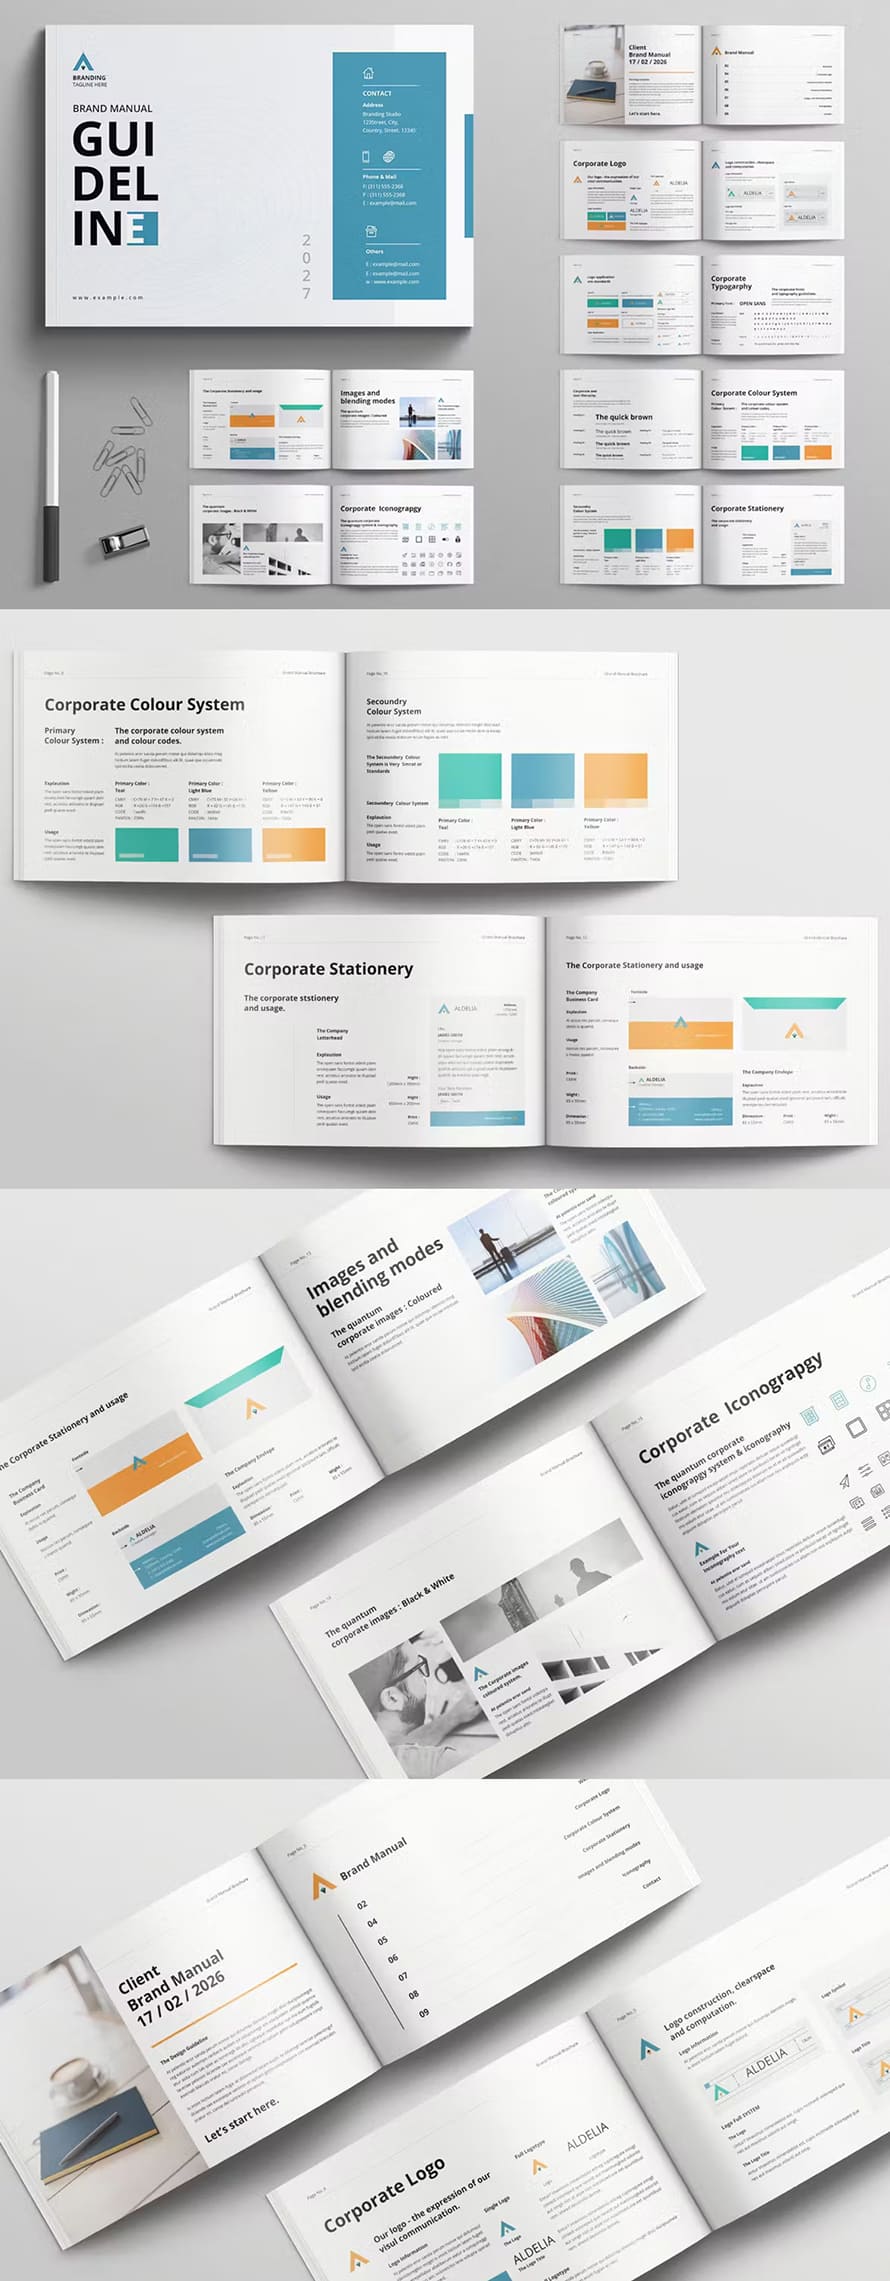 Brand Manual Guidelines Landscape Template